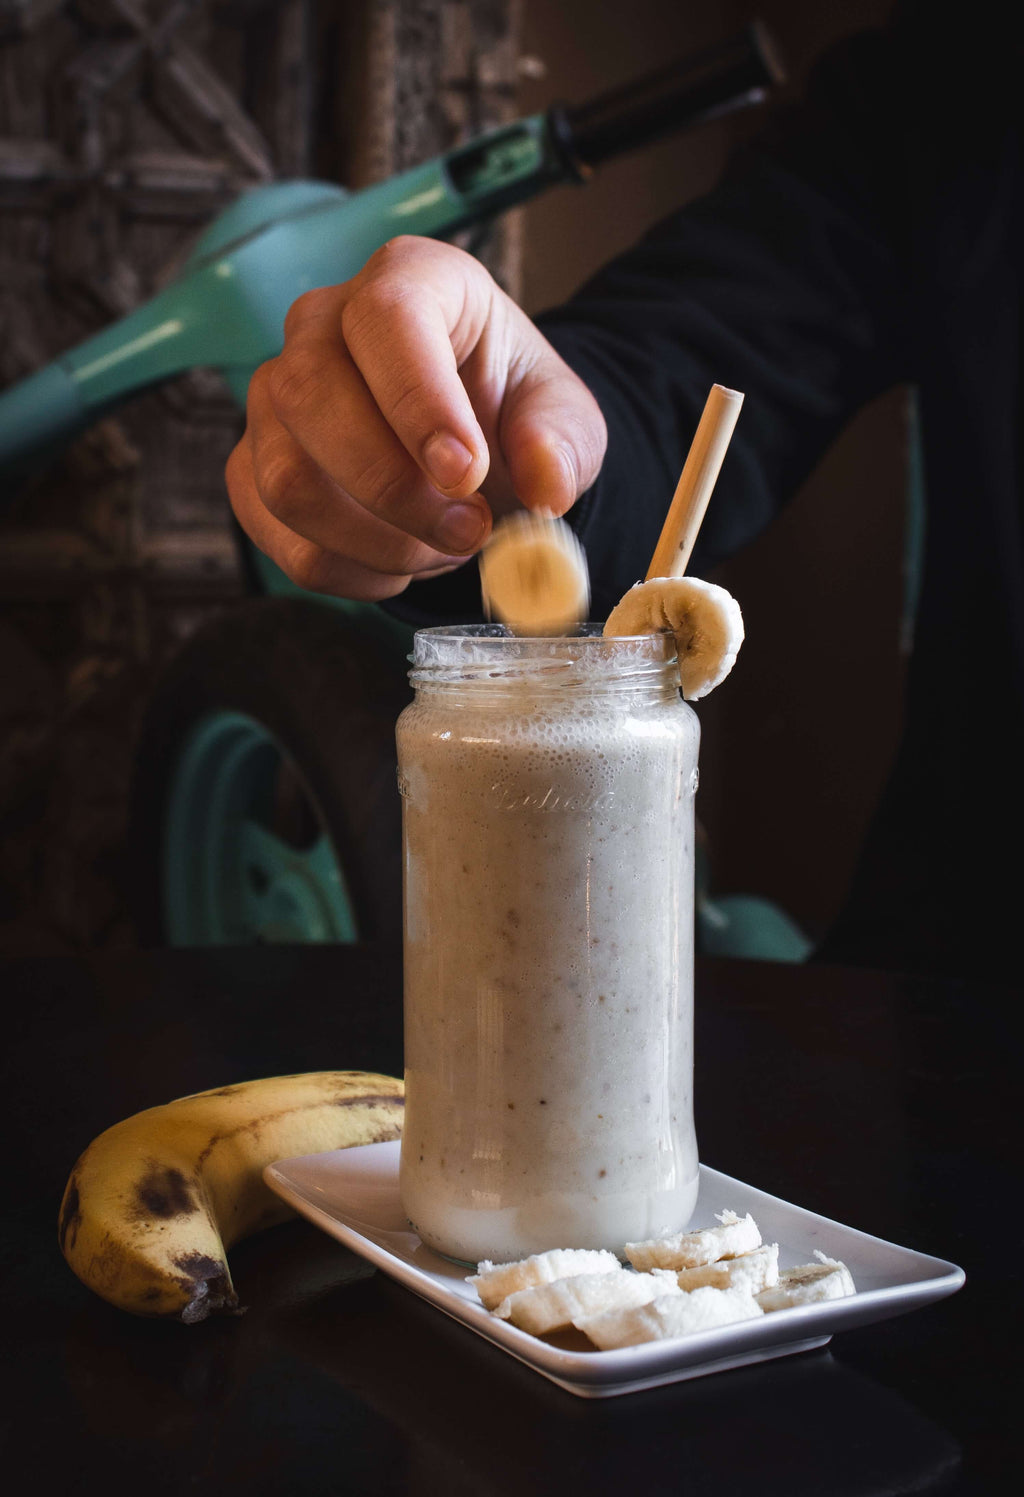 Banana Smoothie - The Best Nigerian Food in Kigali